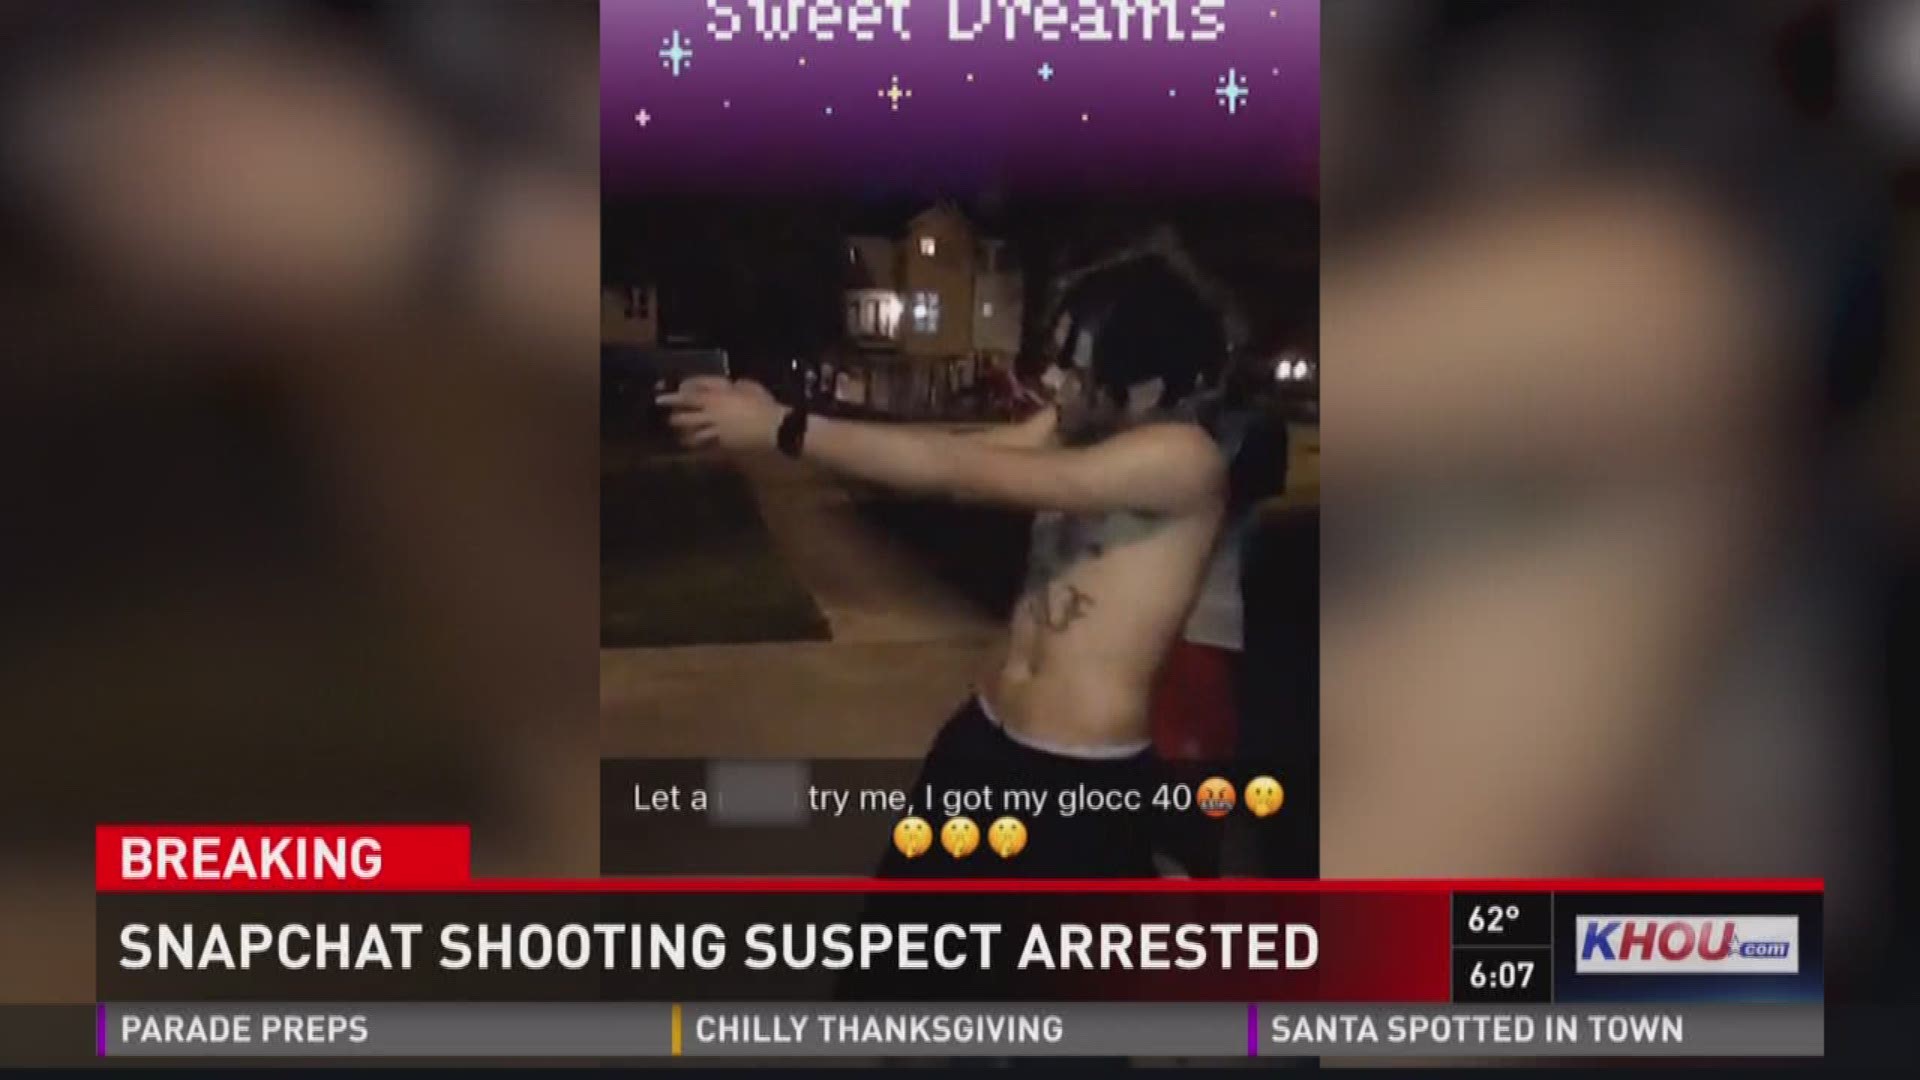 Houston police say they have arrested the man seen shooting a gun in a Snapchat video posted last week from the Memorial Park area.